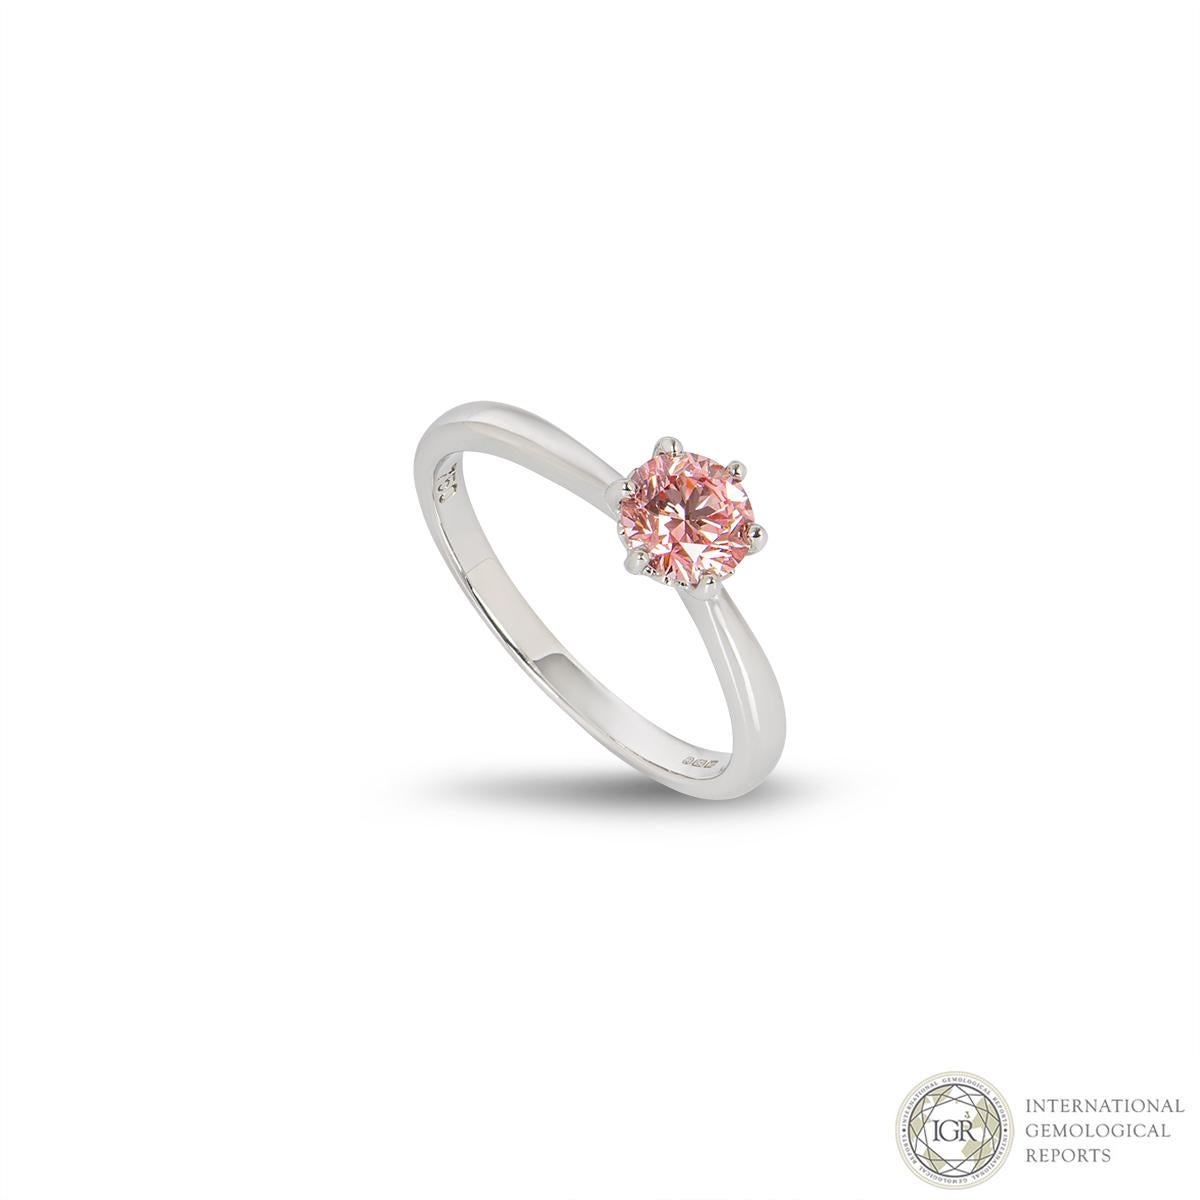 A fancy intense, colour enhanced pink diamond ring. The 0.66ct fancy intense pink diamond is set within a 18k white gold classic six claw setting. The natural diamond has been colour enhanced to produce the distinct fancy intense pink and the